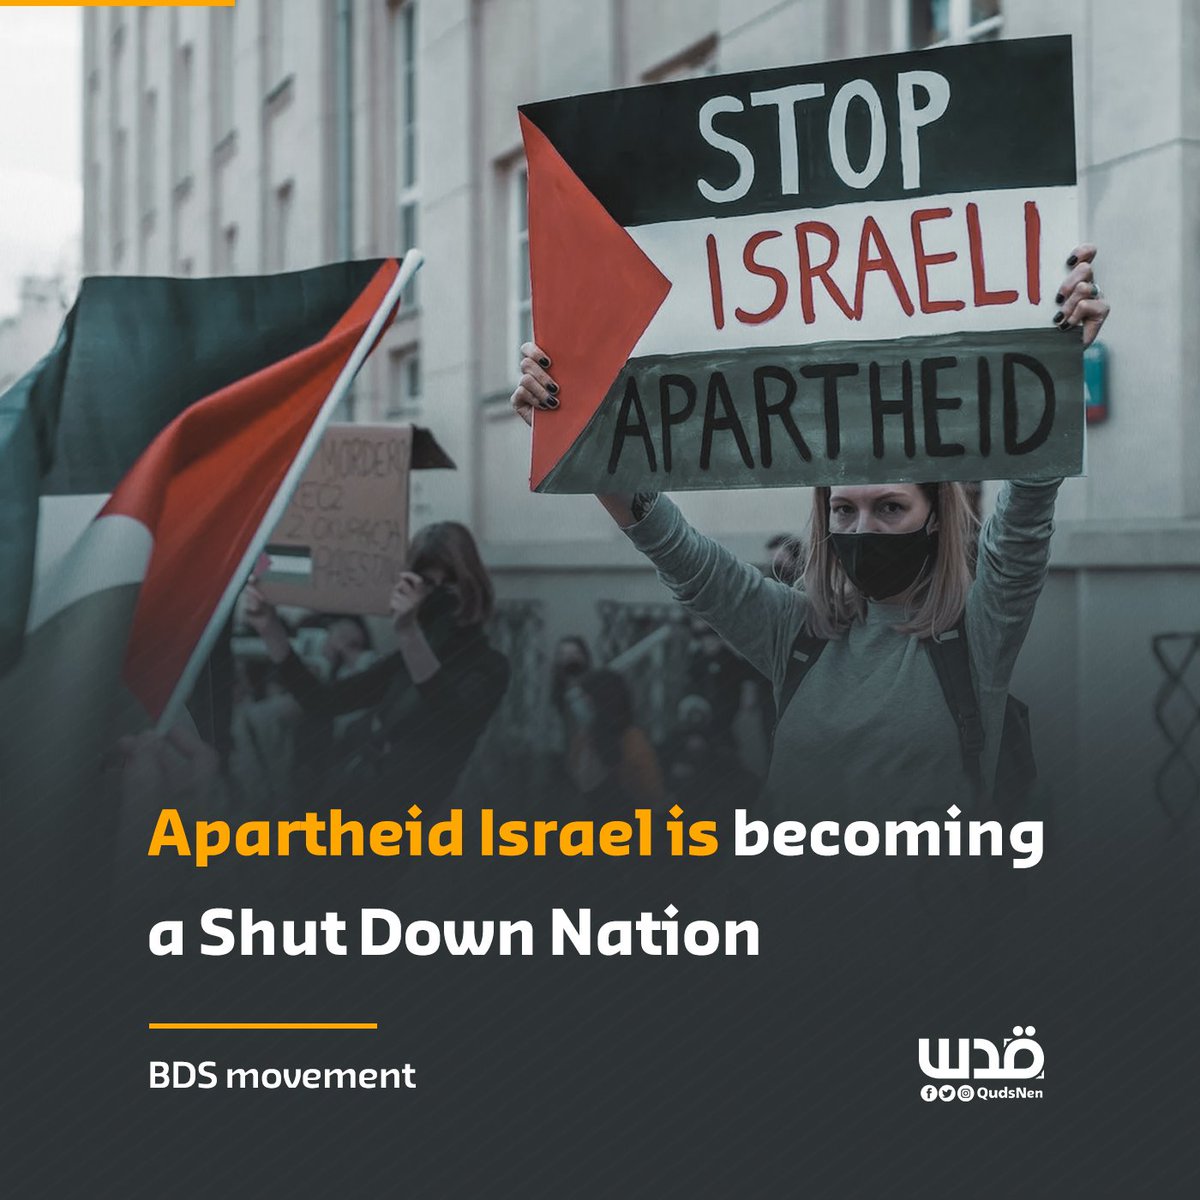 The BDS movement: 'Apartheid Israel is becoming a #ShutDownNation! Just days ago, the BDS movement celebrated bringing G4S, the world’s largest security company, to its knees, making it end all its business in Apartheid Israel.'